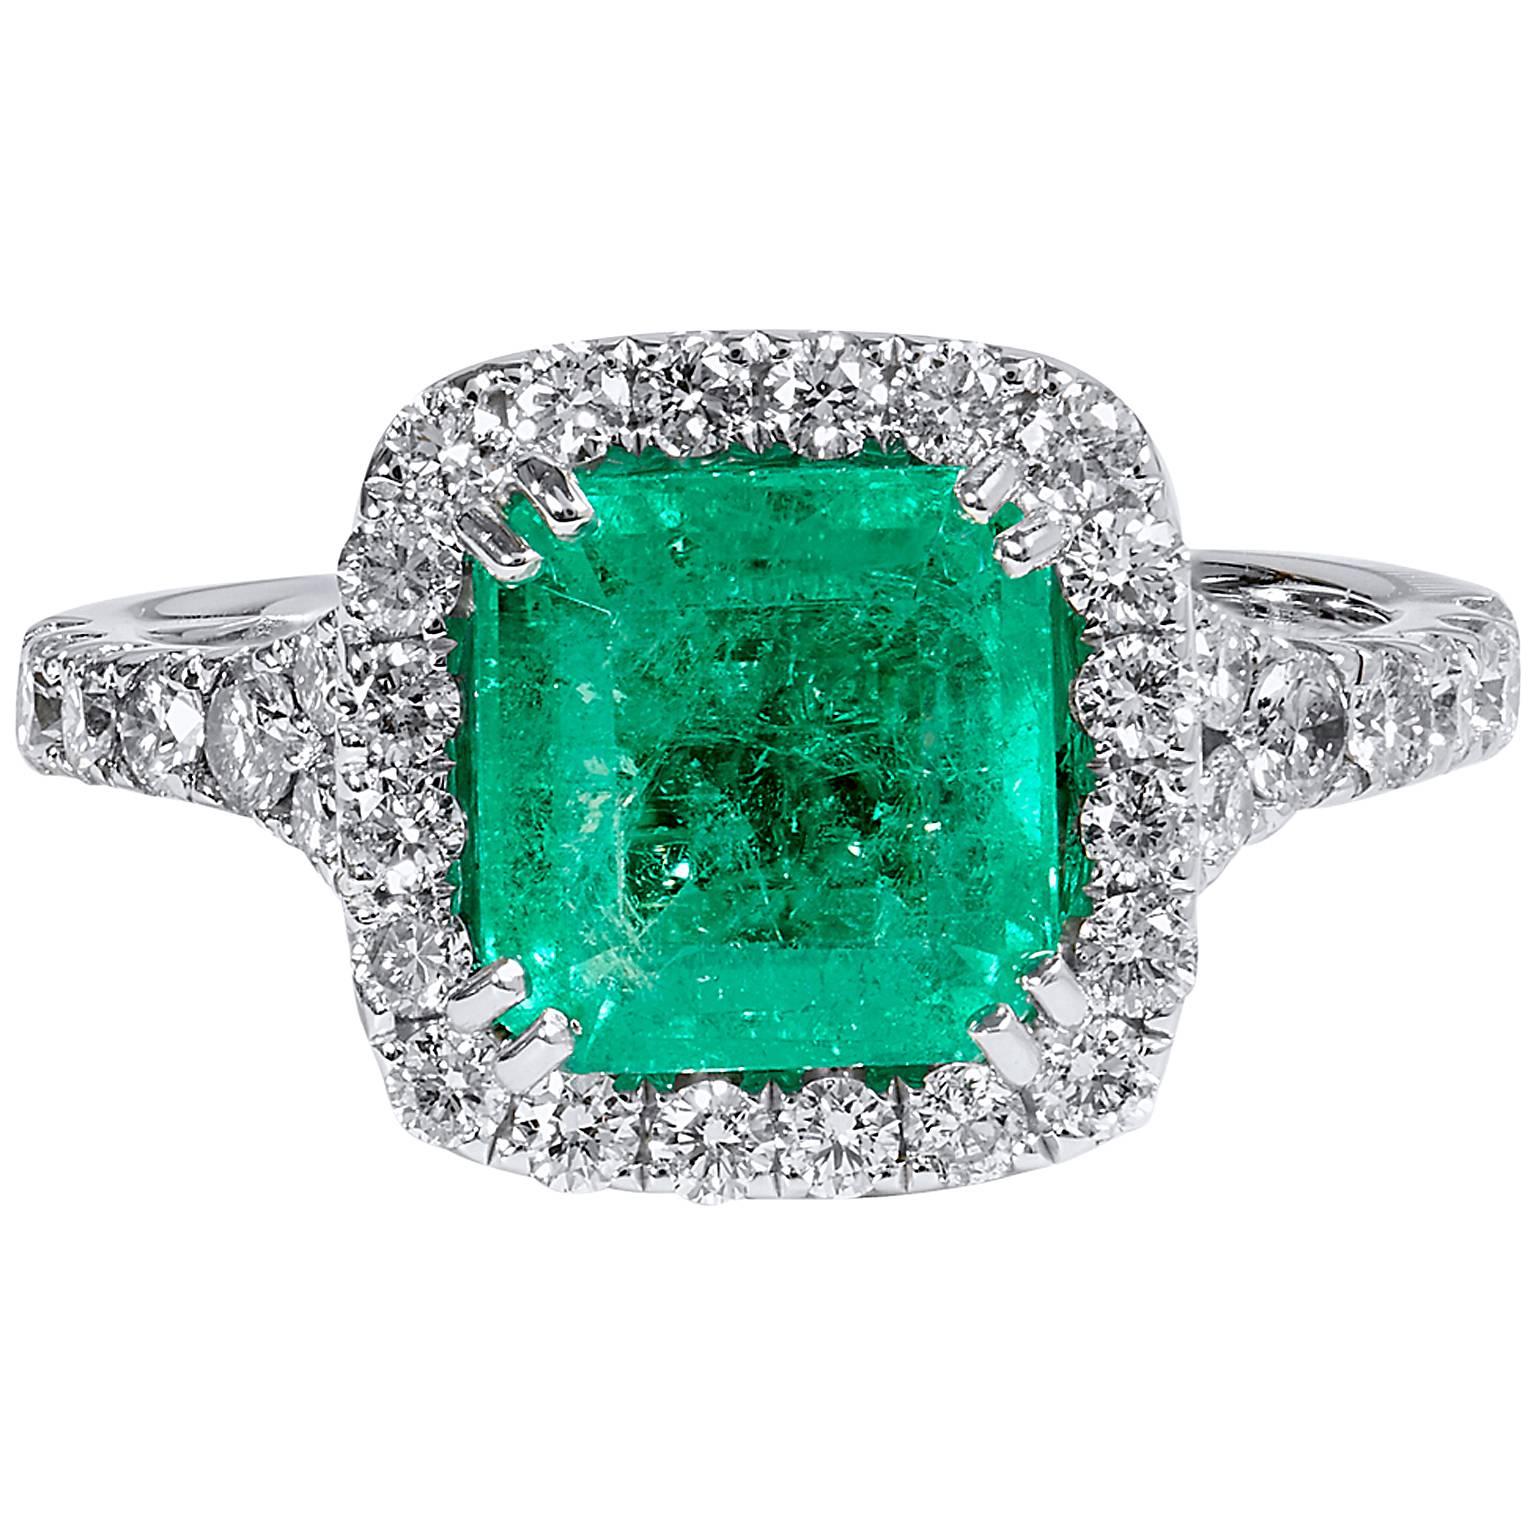 1.92 Carat Colombian Emerald Diamond Gold Cocktail Ring 